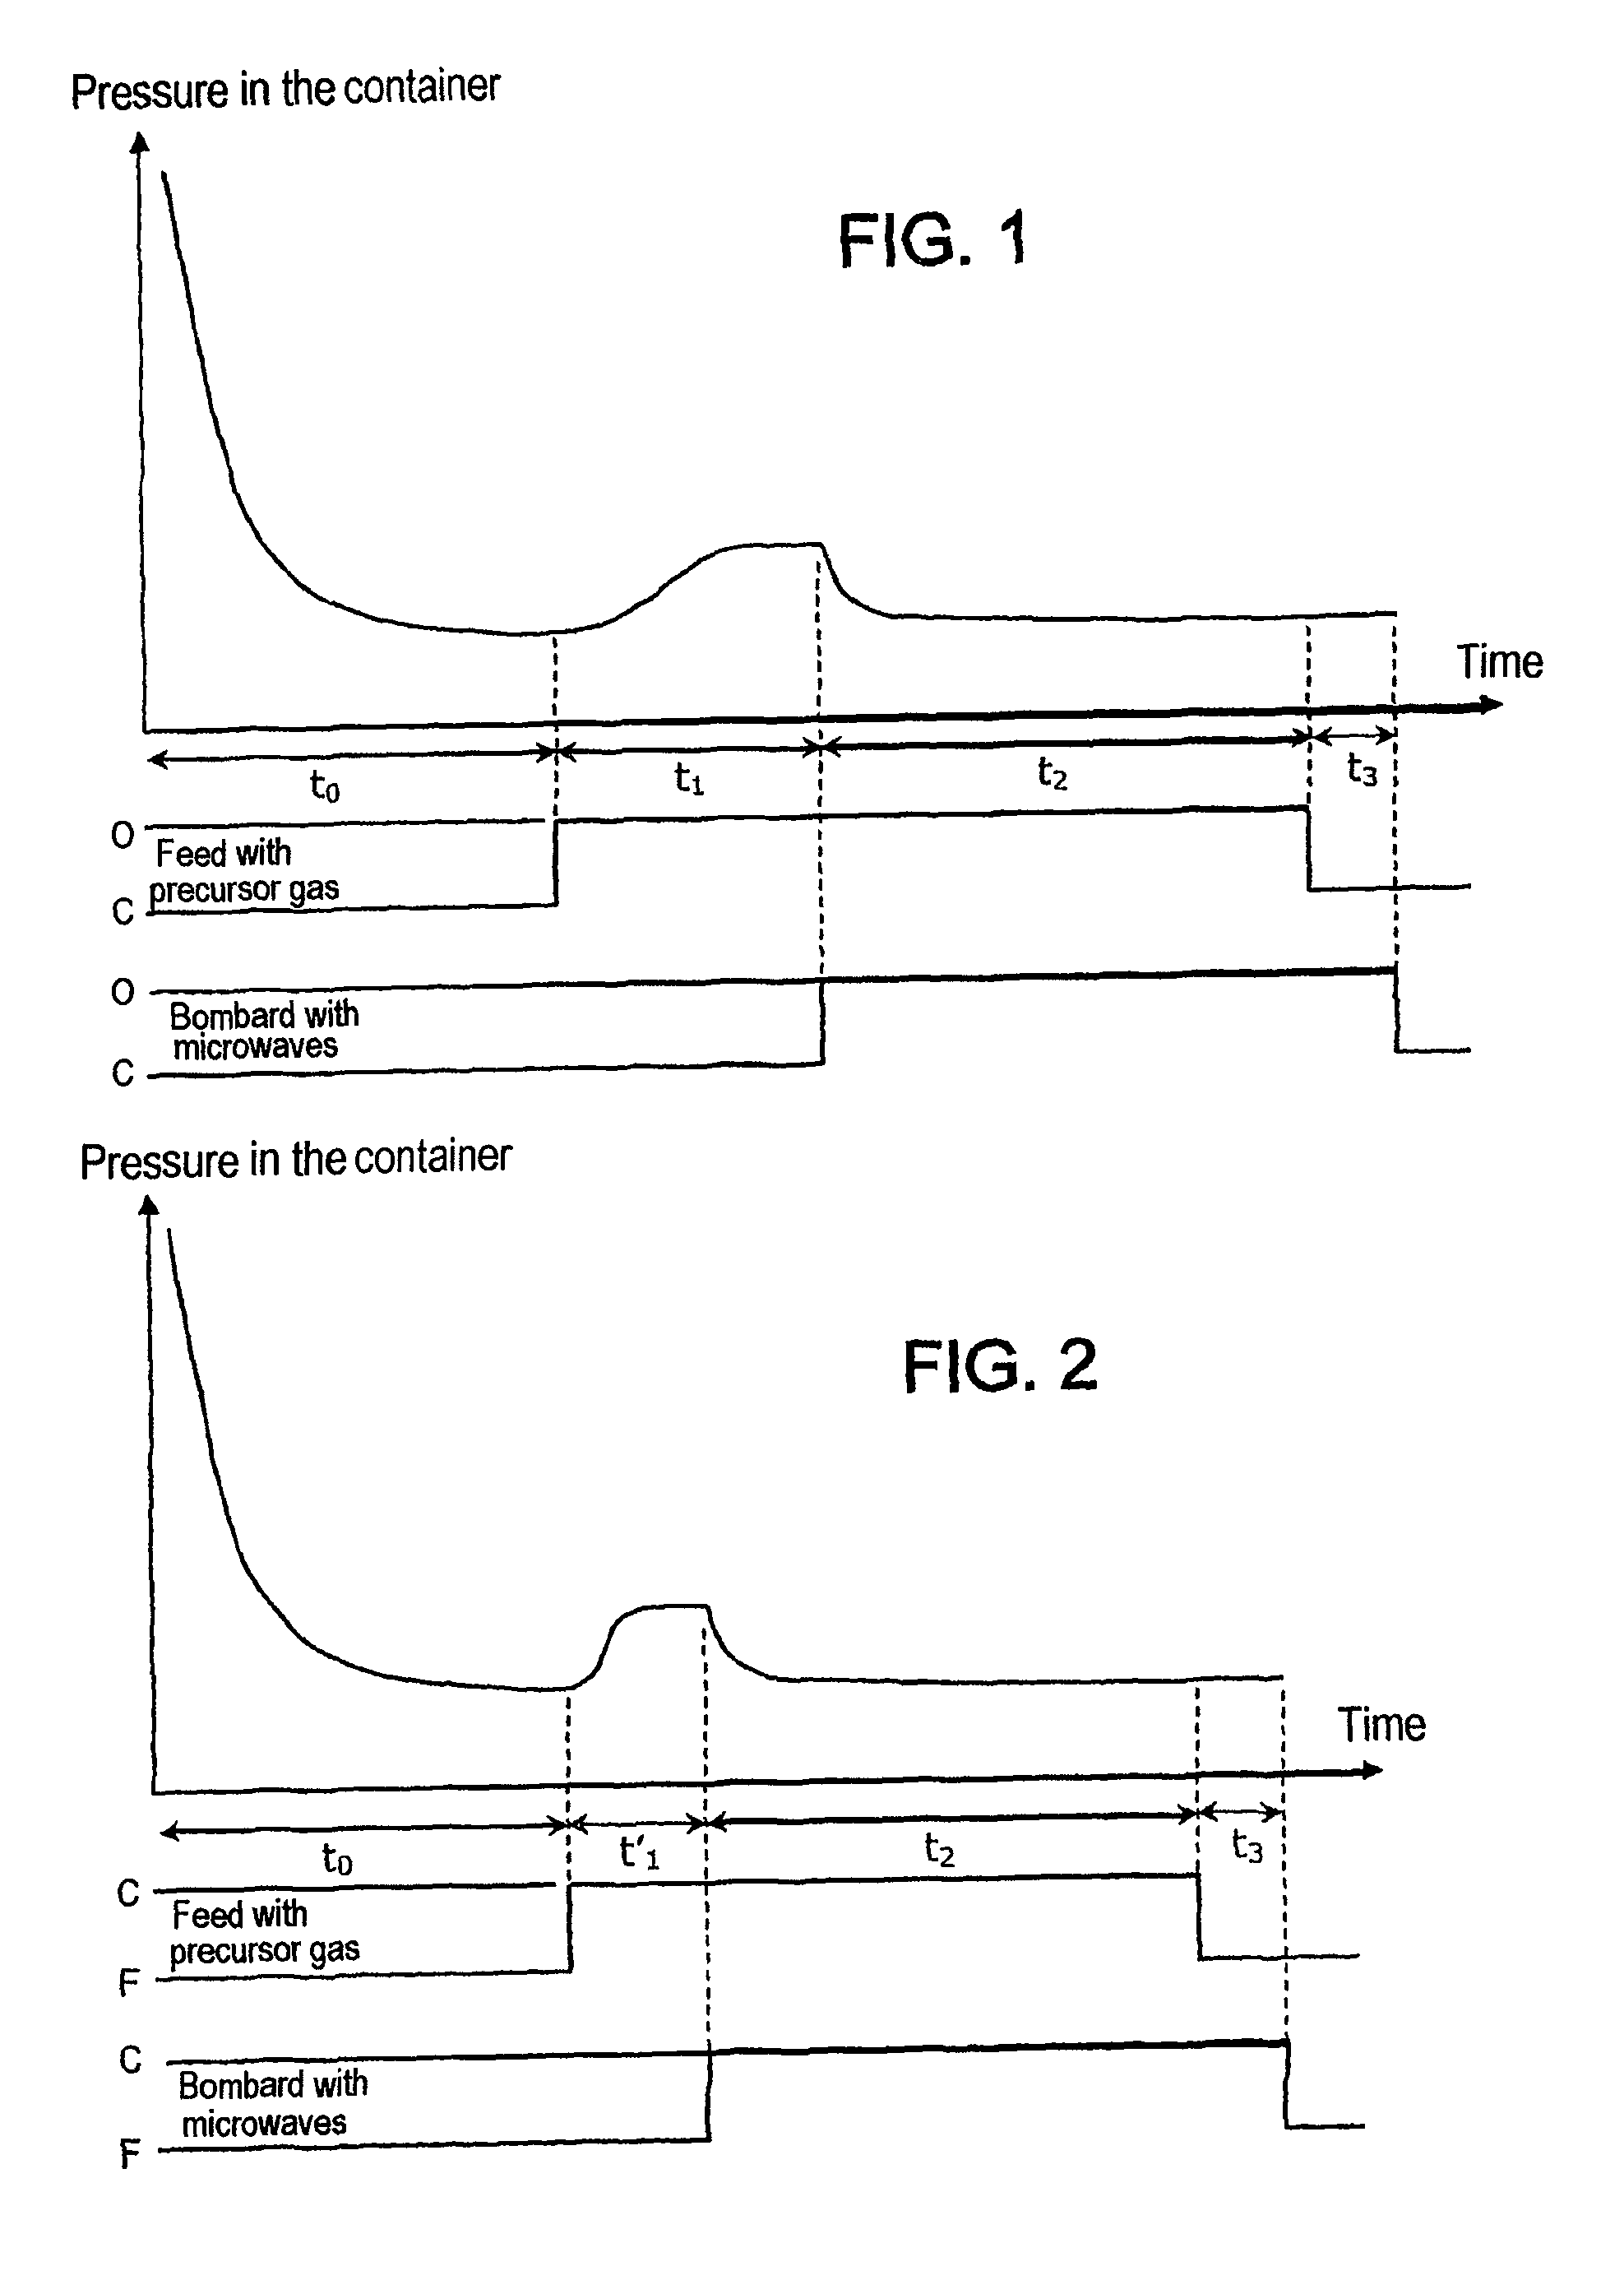 Apparatus for plasma-enhanced chemical vapor deposition (PECVD) of an internal barrier layer inside a container, said apparatus including a gas line isolated by a solenoid valve